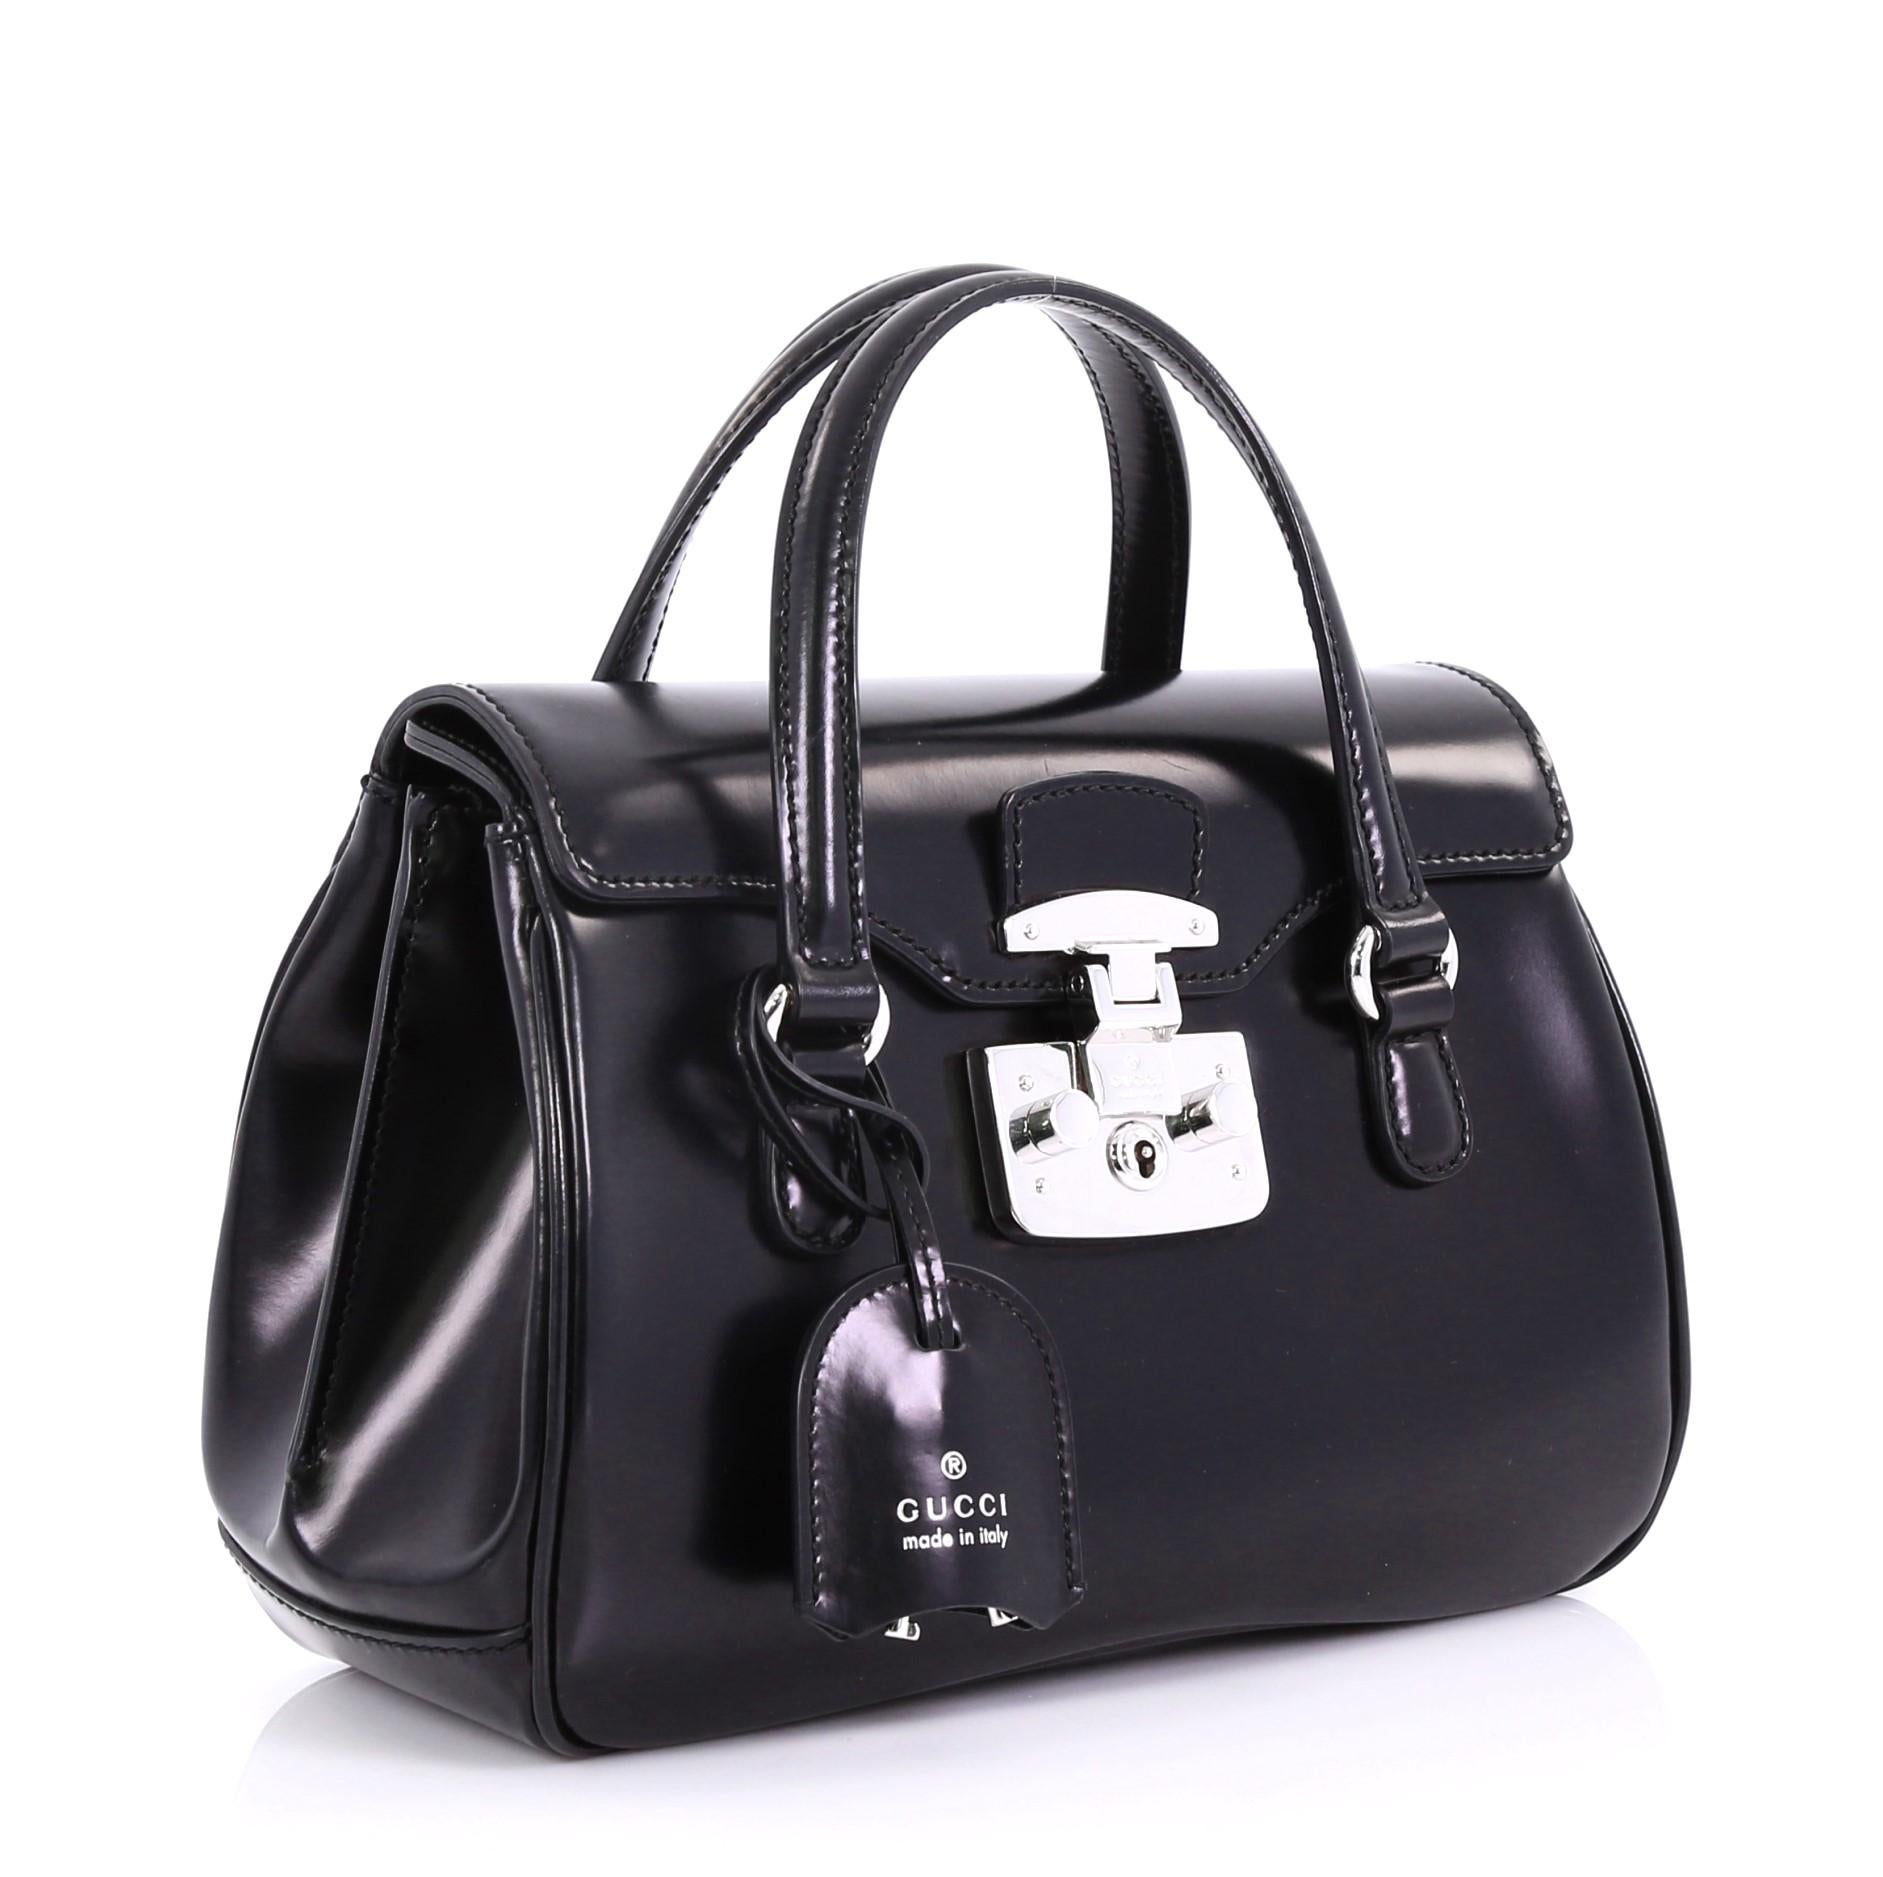 Black Gucci Lady Lock Satchel Leather Small, crafted in black glazed leather